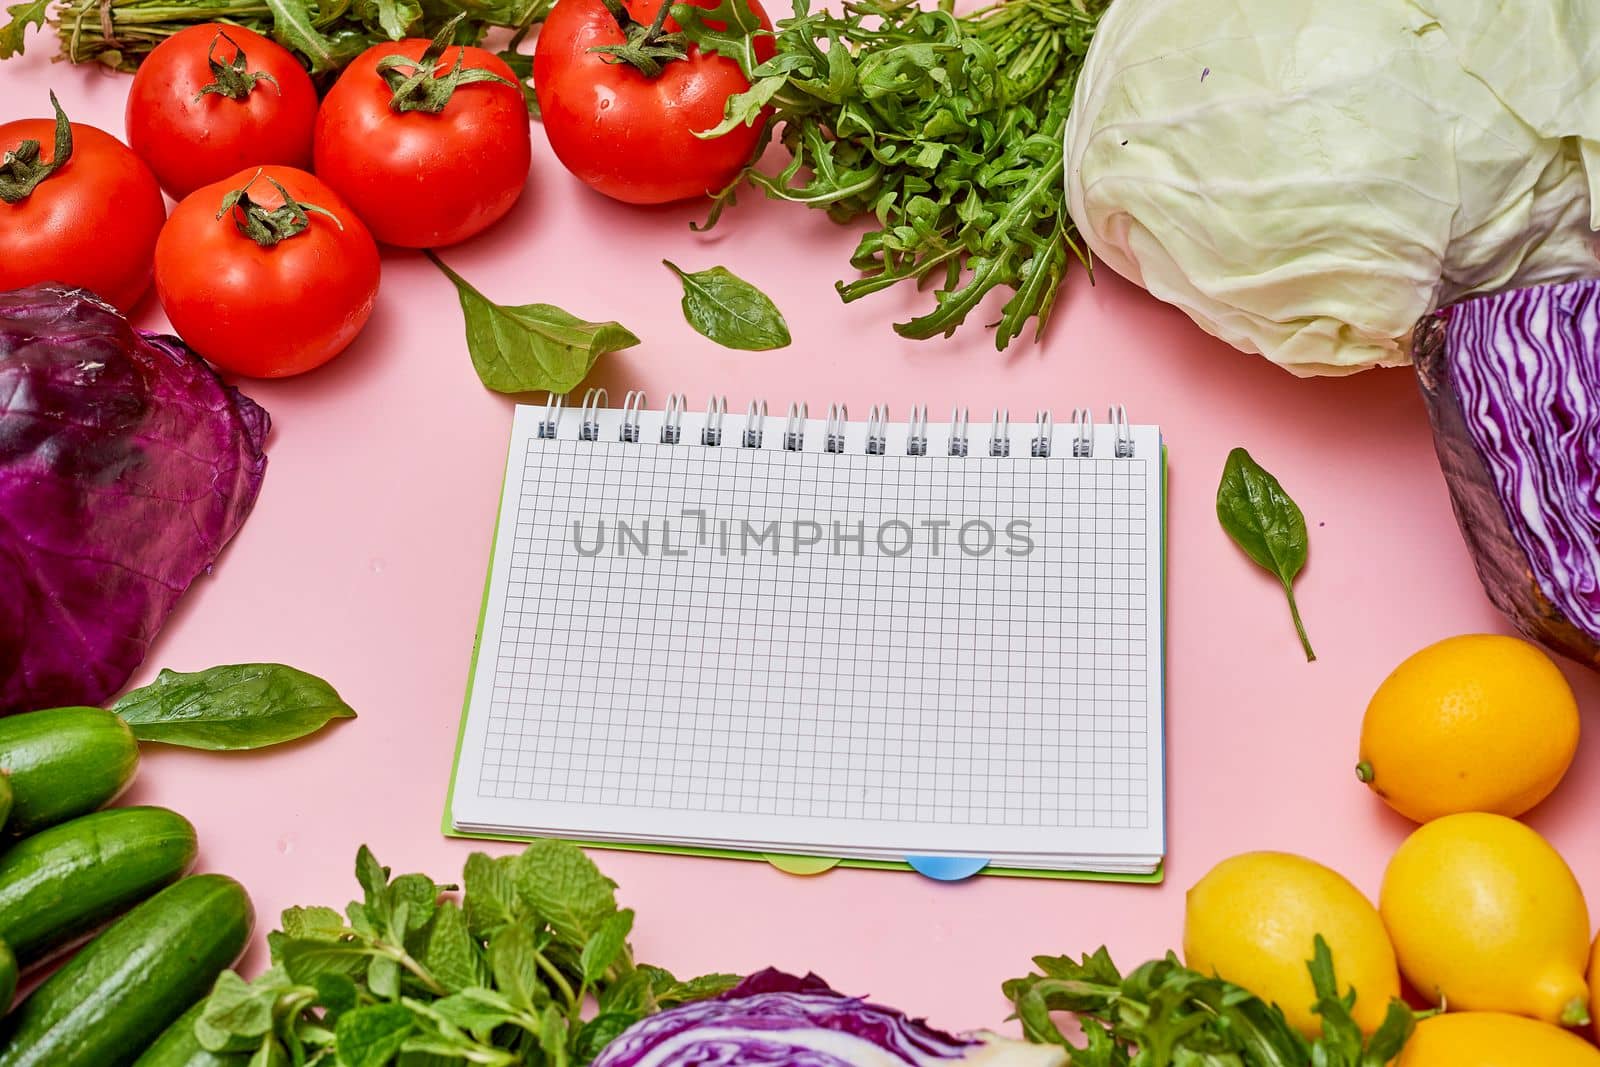 various vegetables and fruits on a pink background with a notepad in the middle that has been used for writing